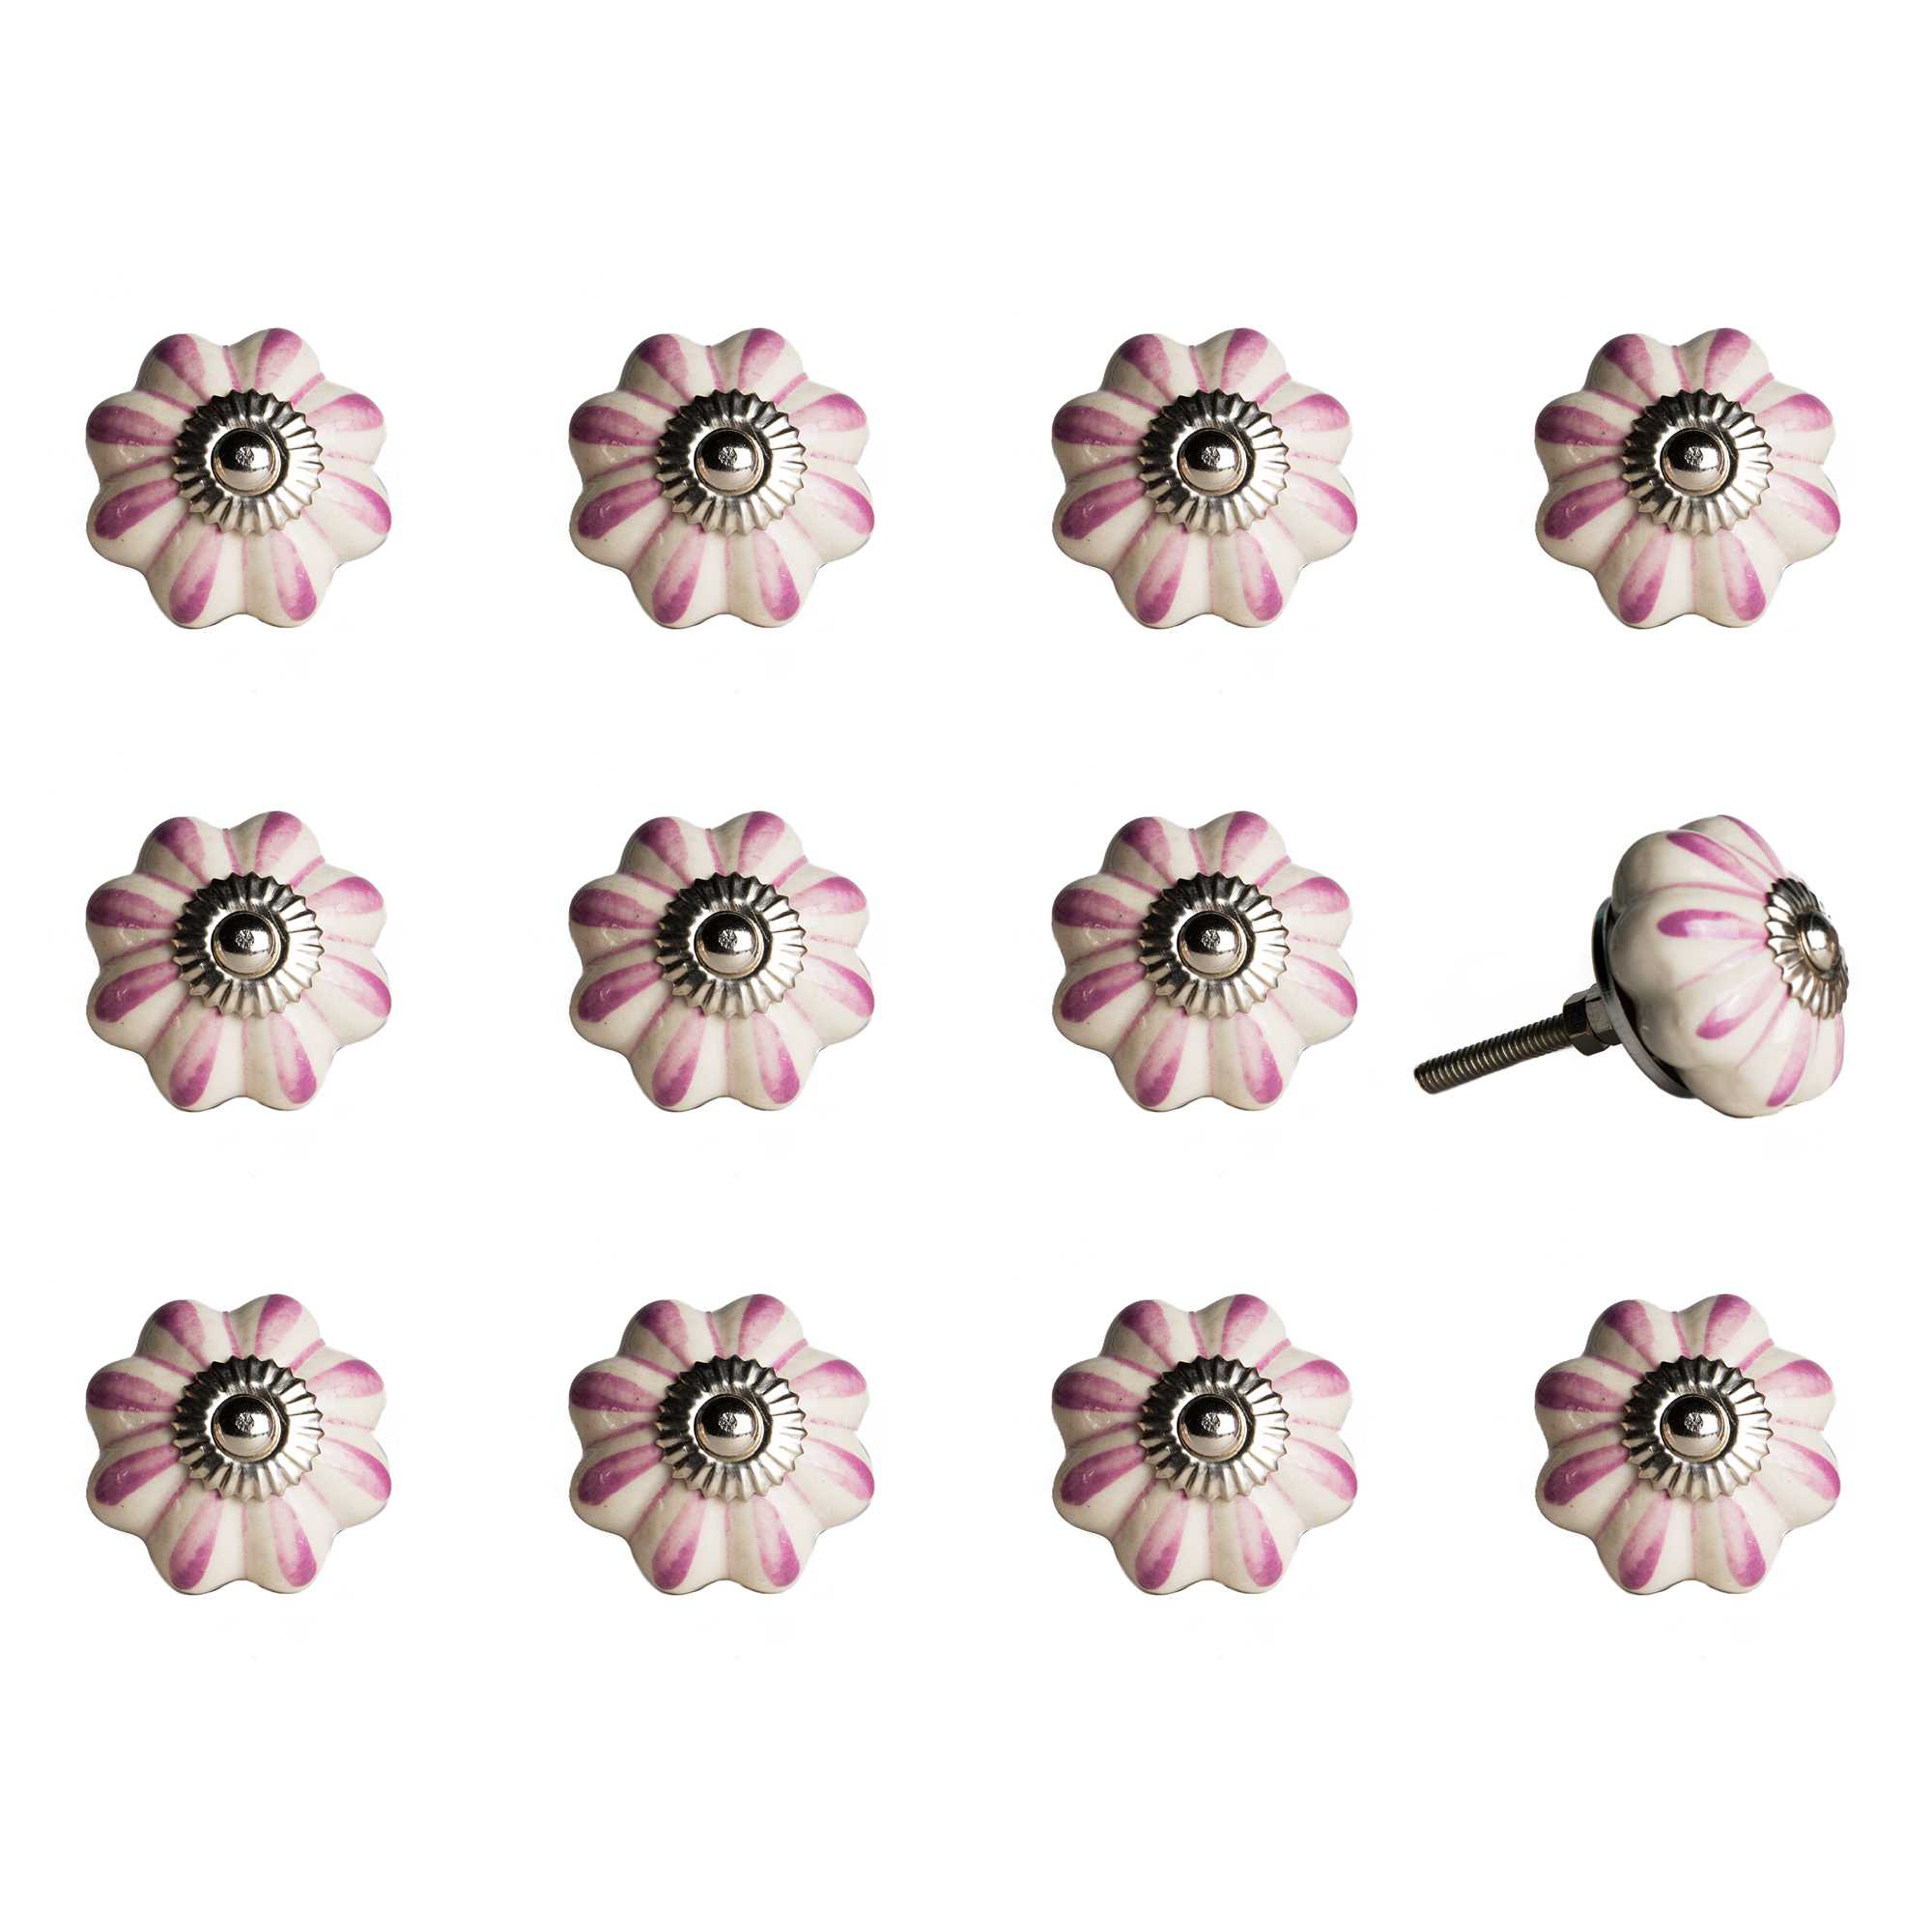 1.5" x 1.5" x 1.5" Cream, Pink and Silver - Knobs 12-Pack